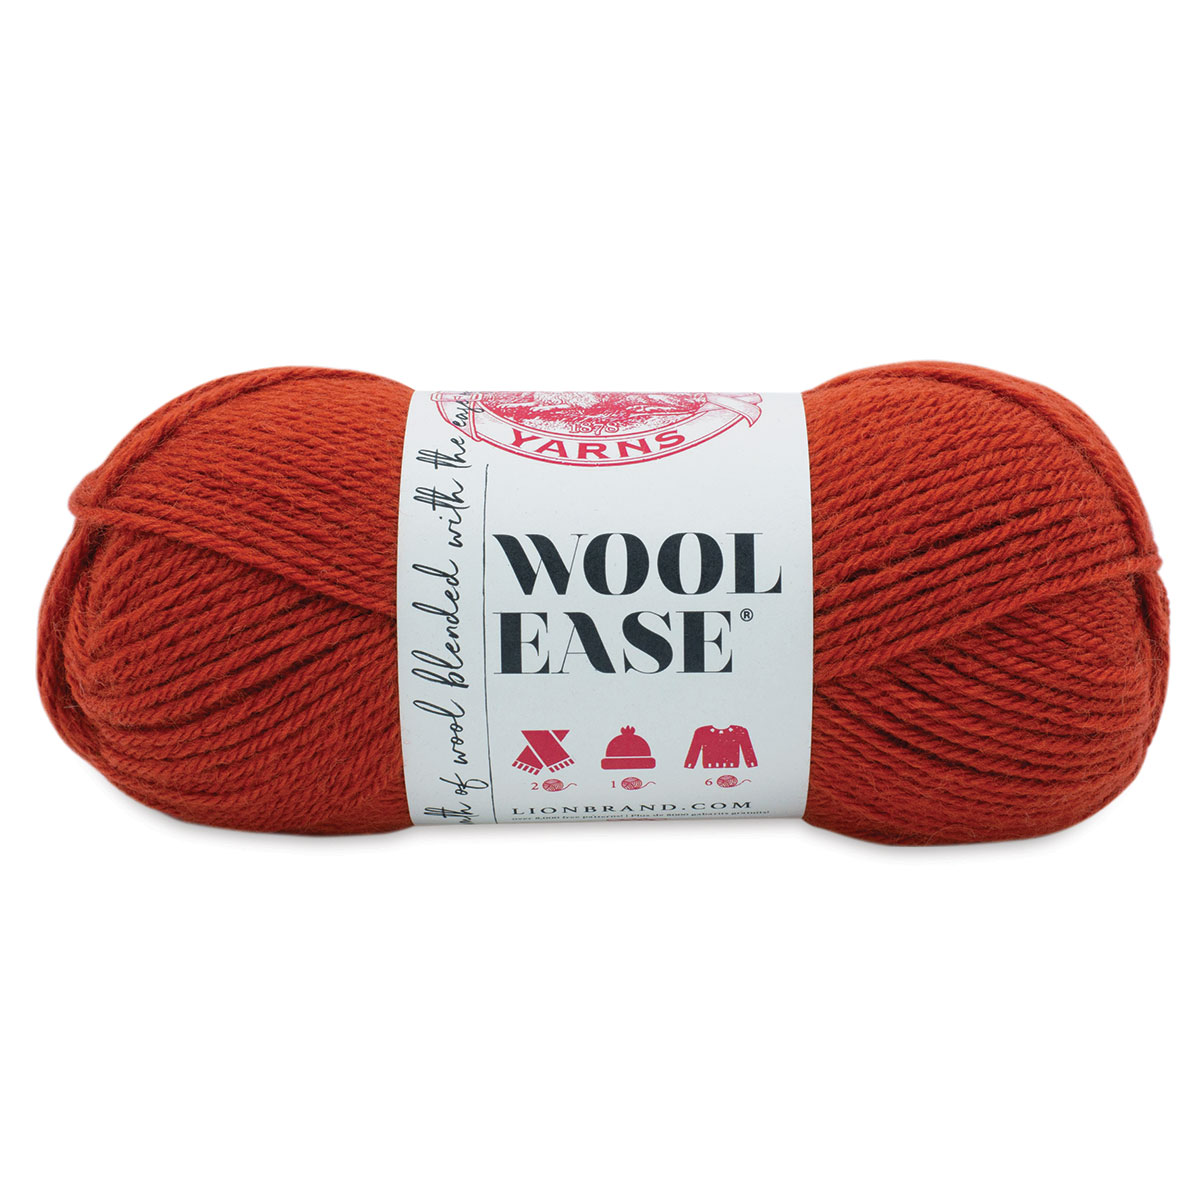 Lion Brand Wool-Ease Yarn -Forest Green Heather, 1 count - Foods Co.